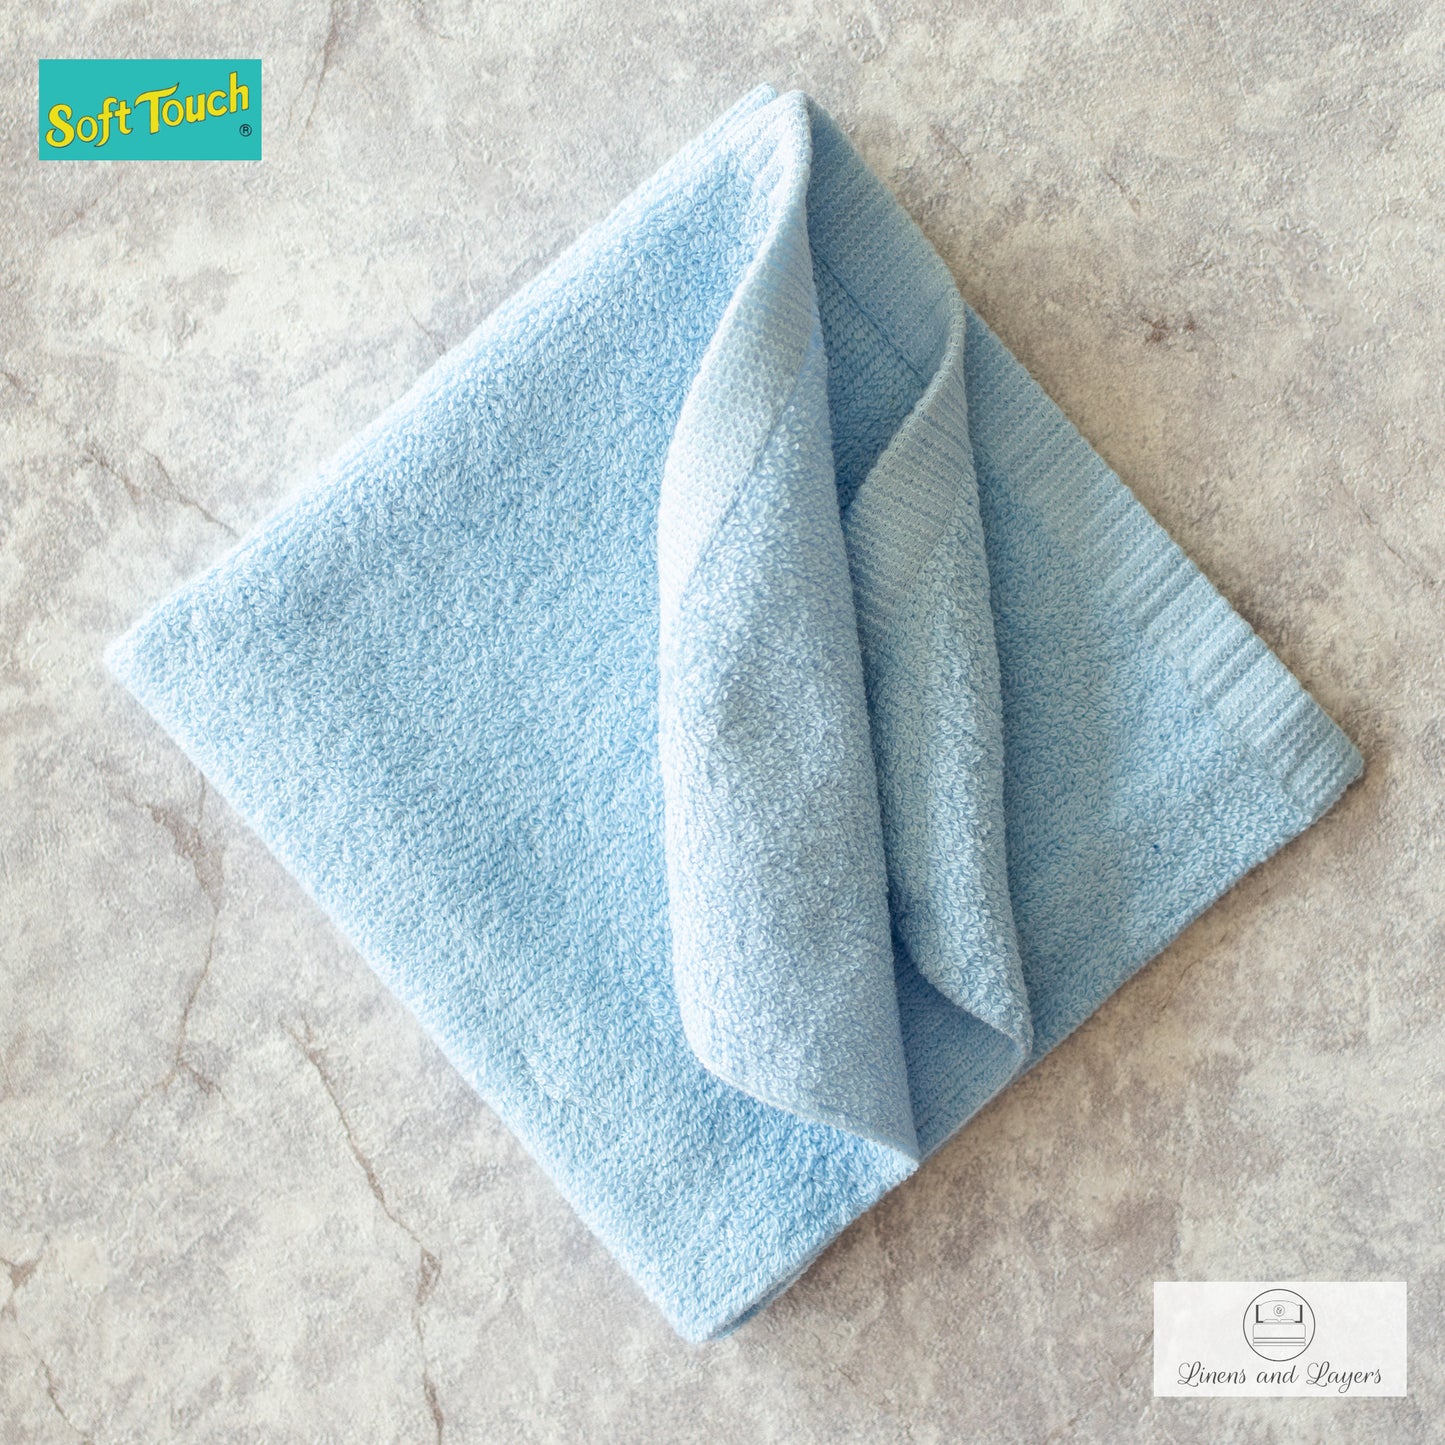 Soft Touch Face Towel (370 GSM) - H-1313 Terrycloth - 13x13 inches